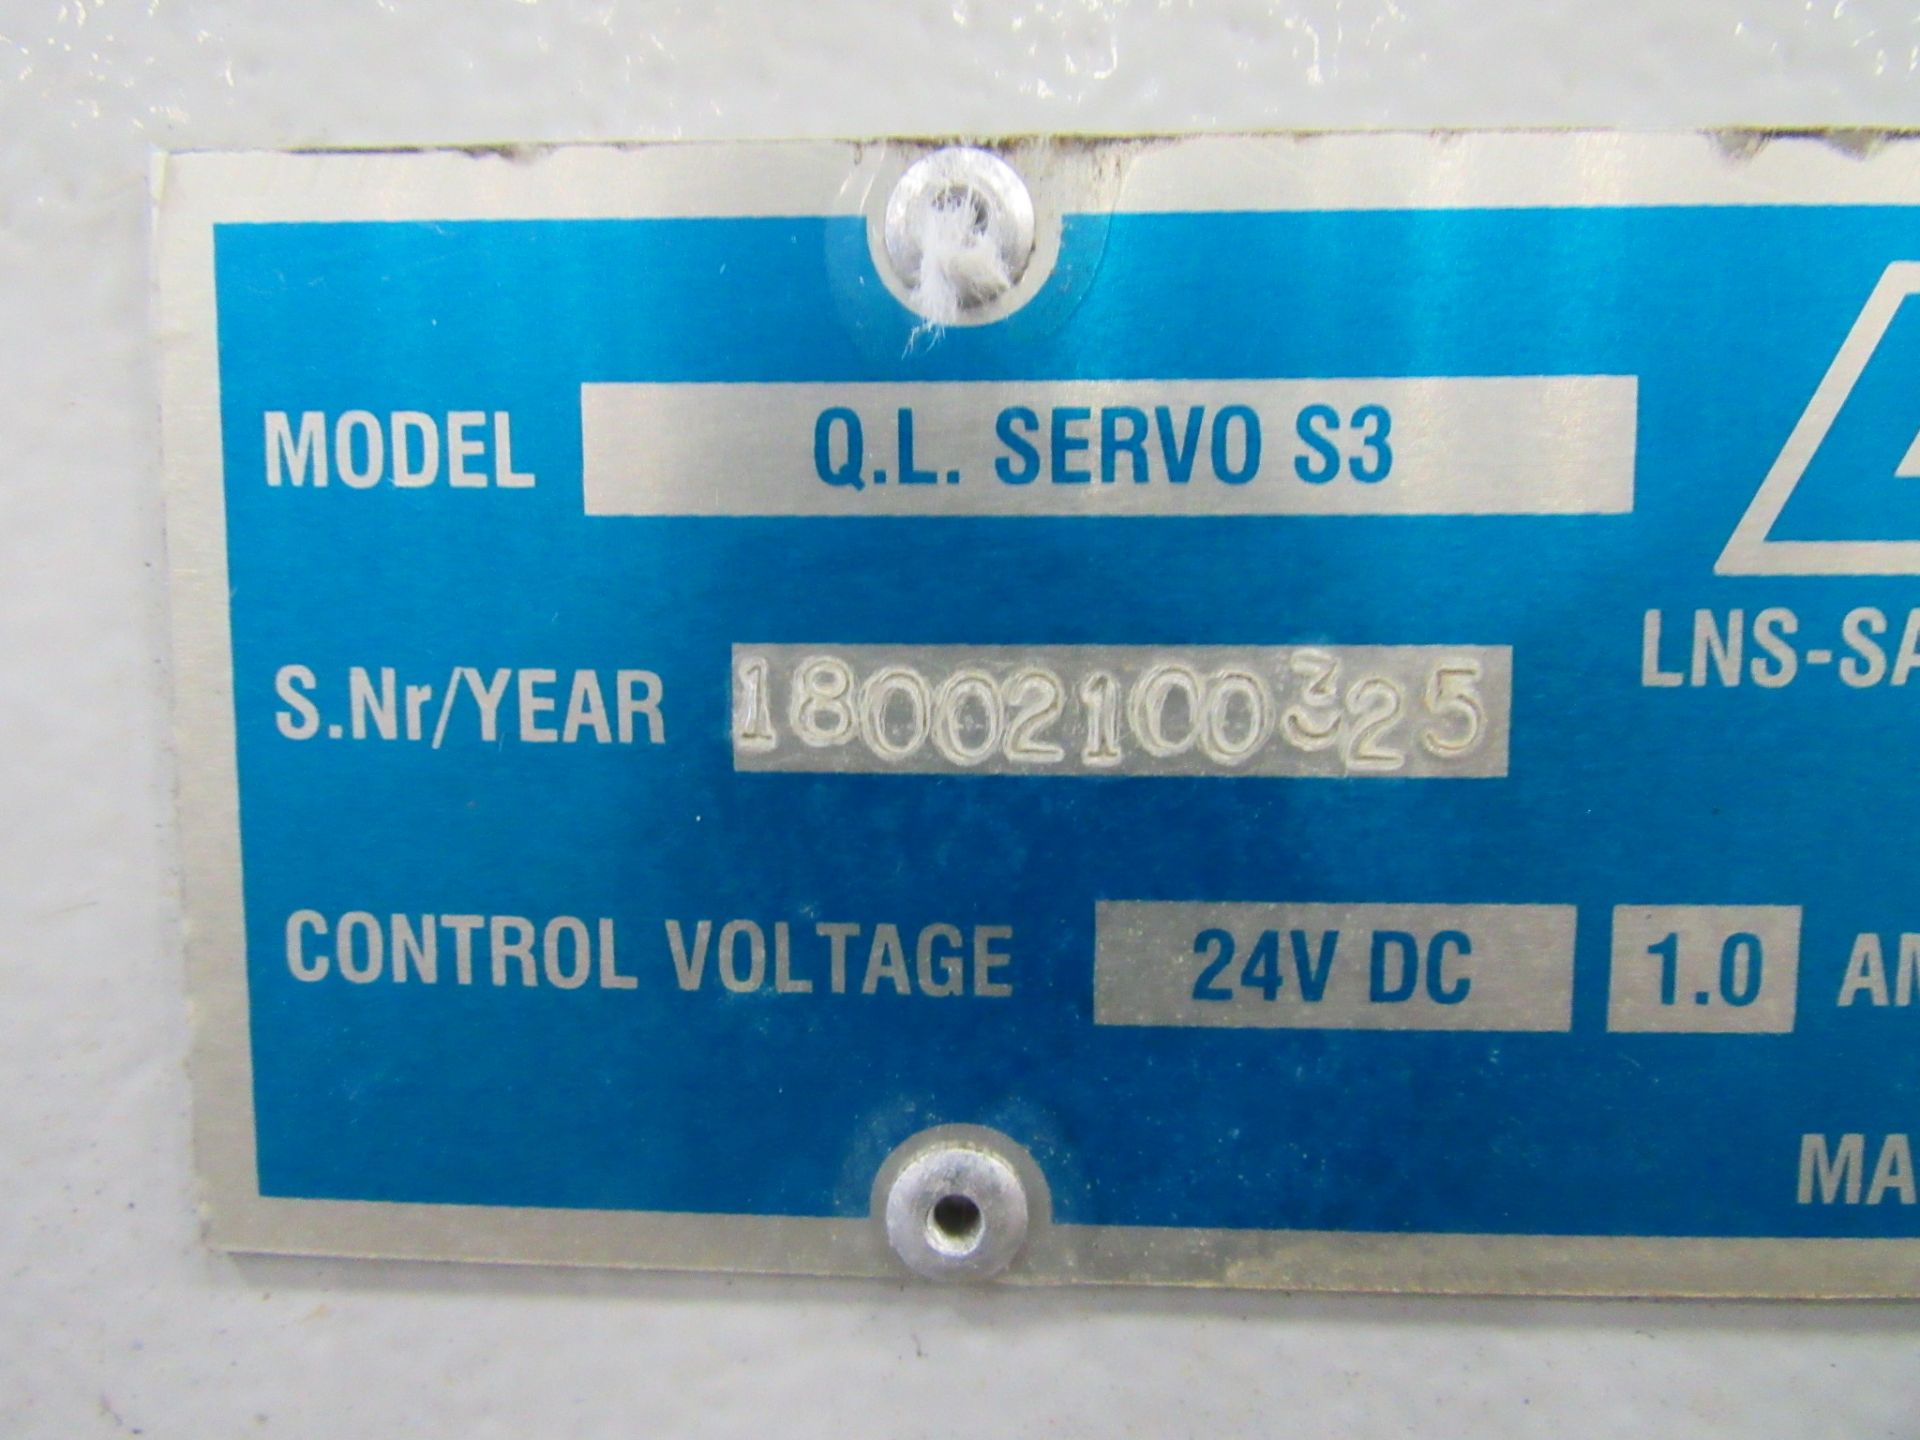 LNS Quick Load Servo S3T Magazine Bar Feeder with LNS Readout, sn:18002100325 - Image 6 of 6